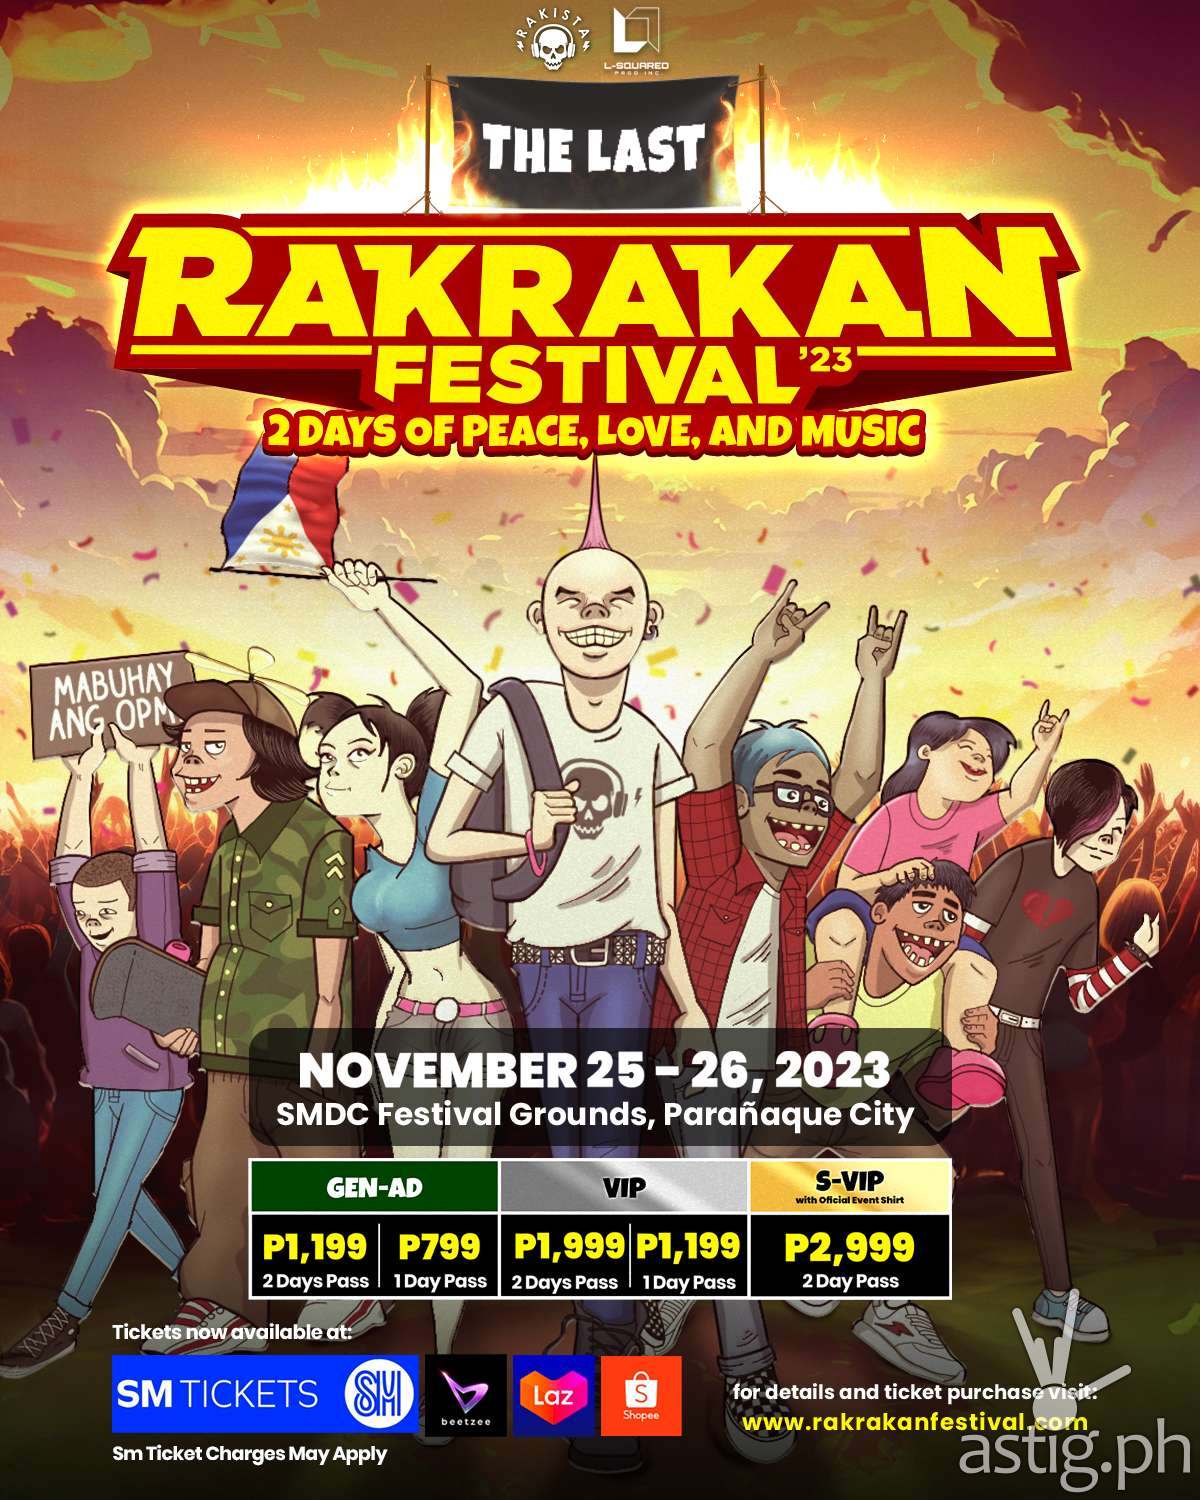 Rakrakan 2023 is finally happening: Official venue, schedule, and ticket prices [event]